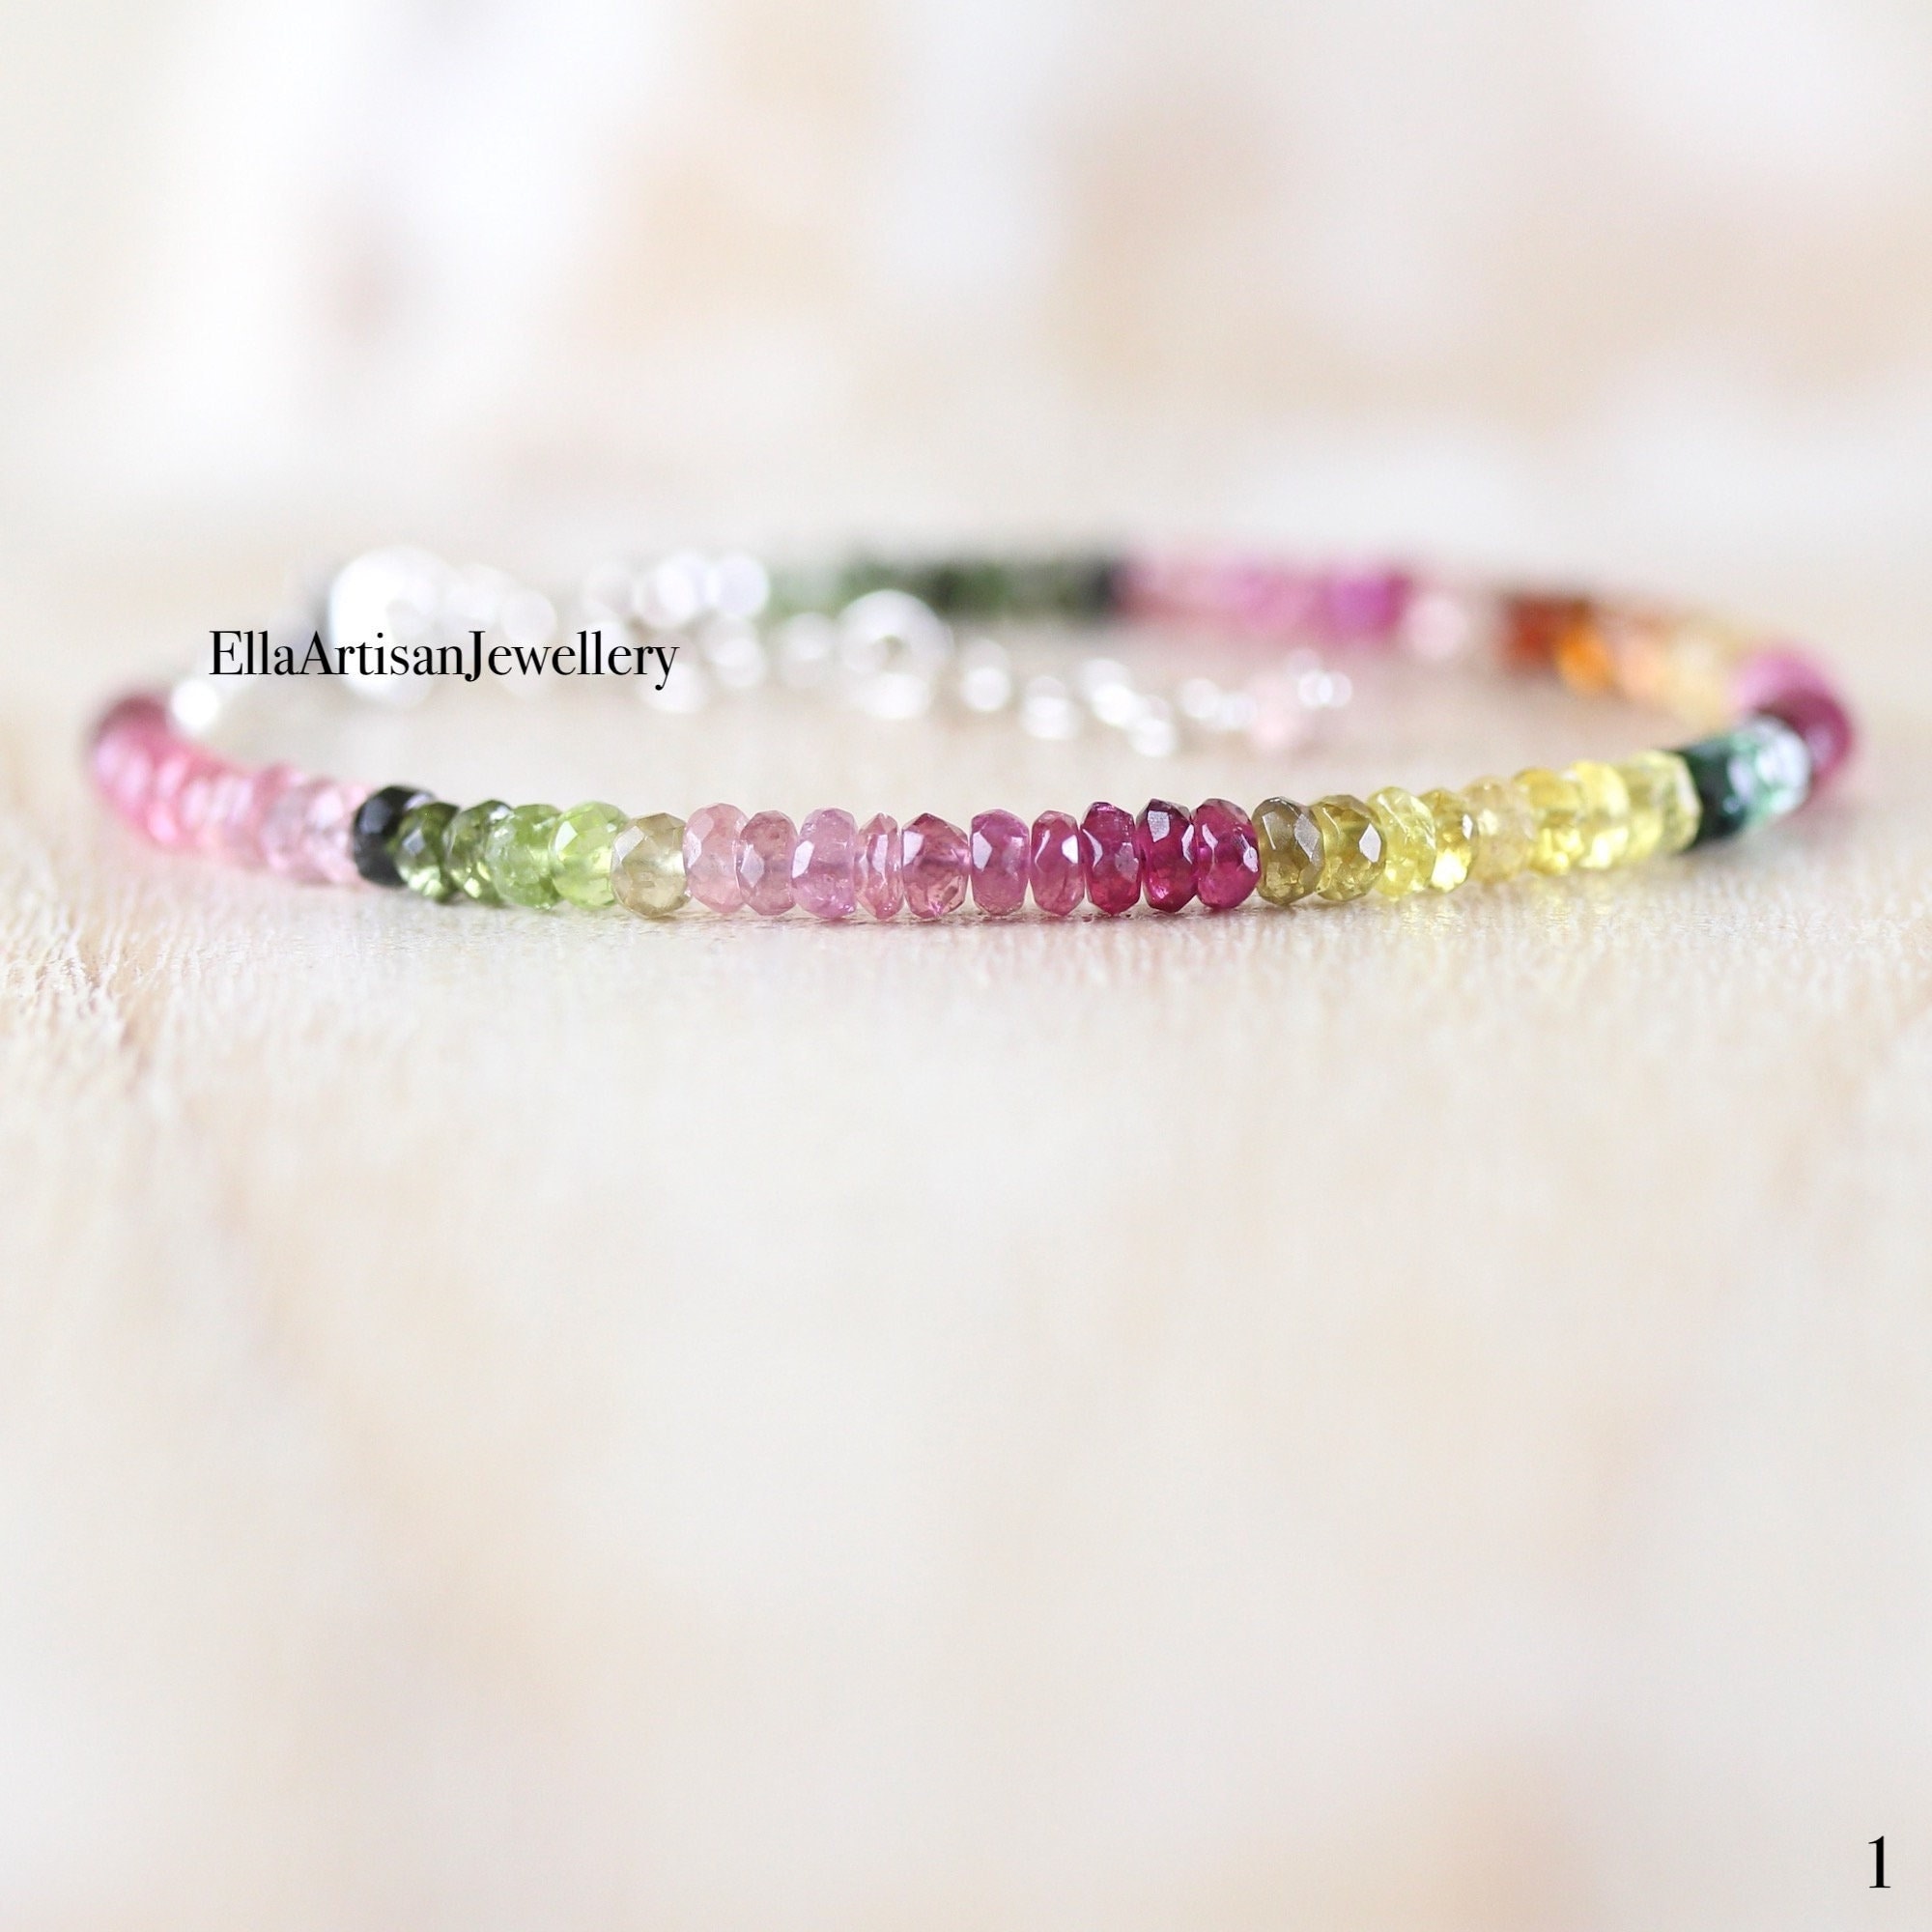 Adjustable from Size 6.5-7.5 Inches,BWT65 Watermelon Tourmaline Bracelet,925 Sterling Silver Chain Extender 1 Inch 